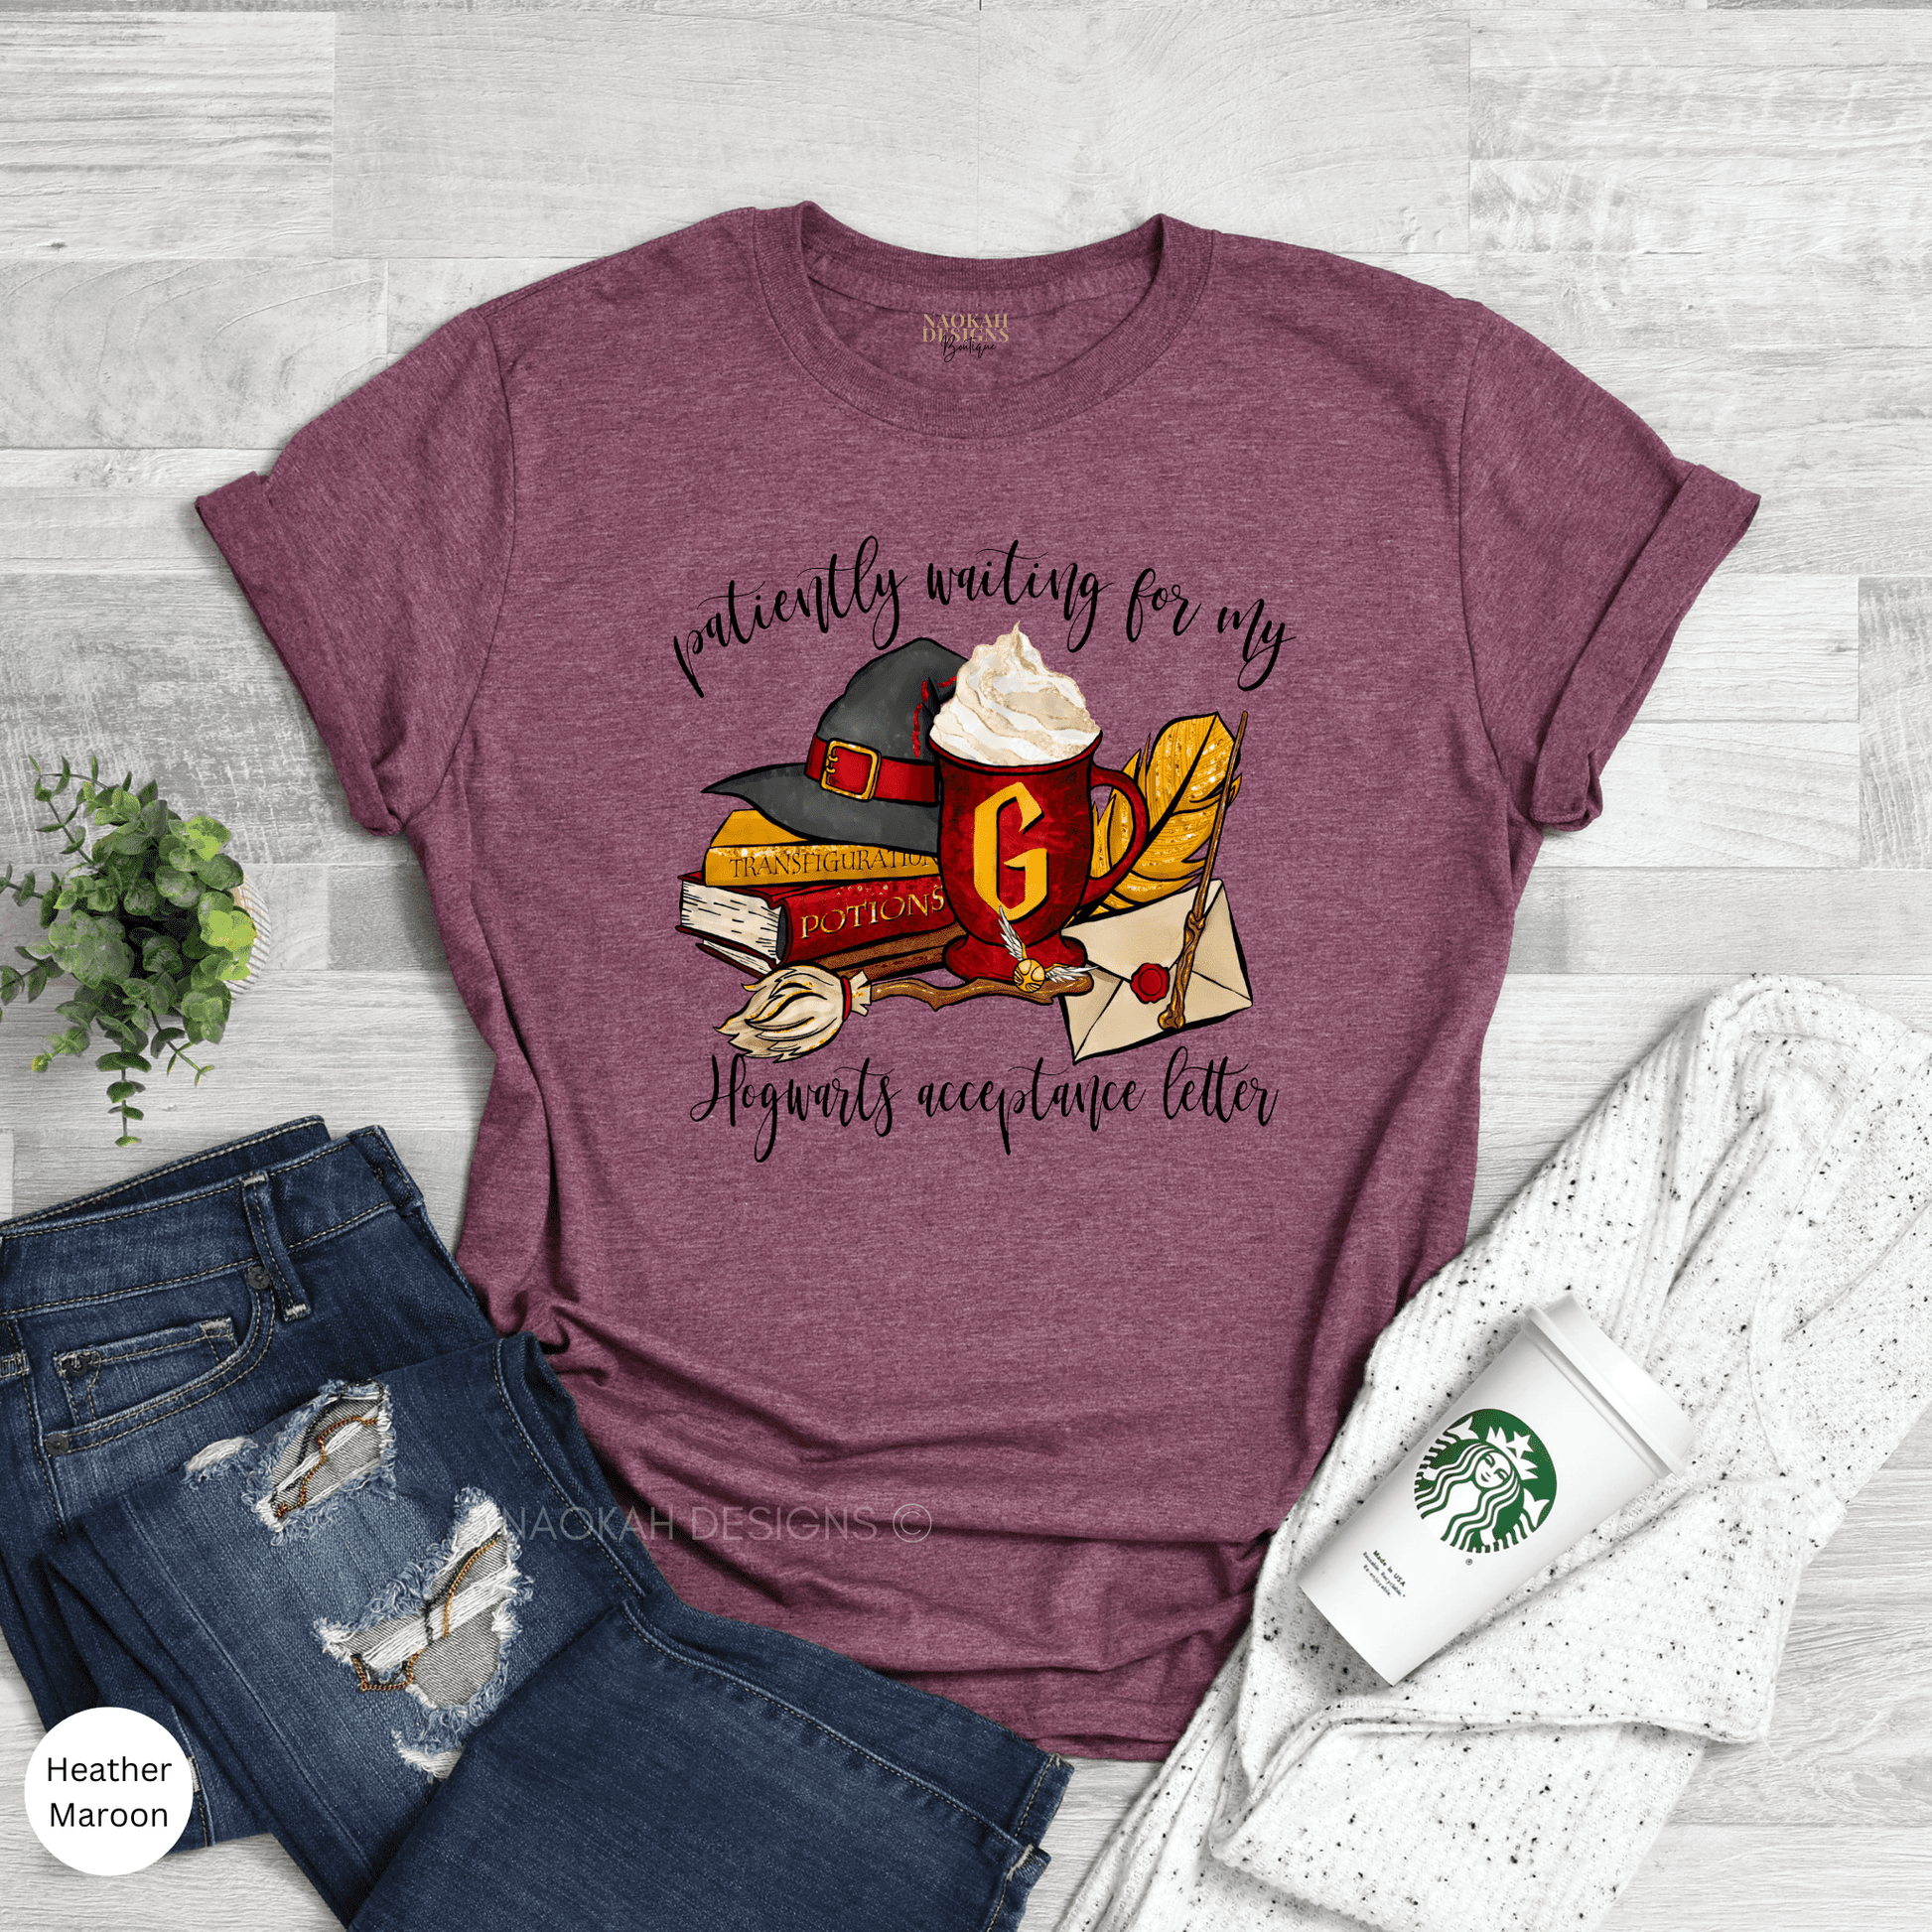 Patiently Waiting For My Hogwarts Acceptance Letter Shirt, Hogwarts Letter Shirt, Owl Delivery Shirt, Wizard School Shirt